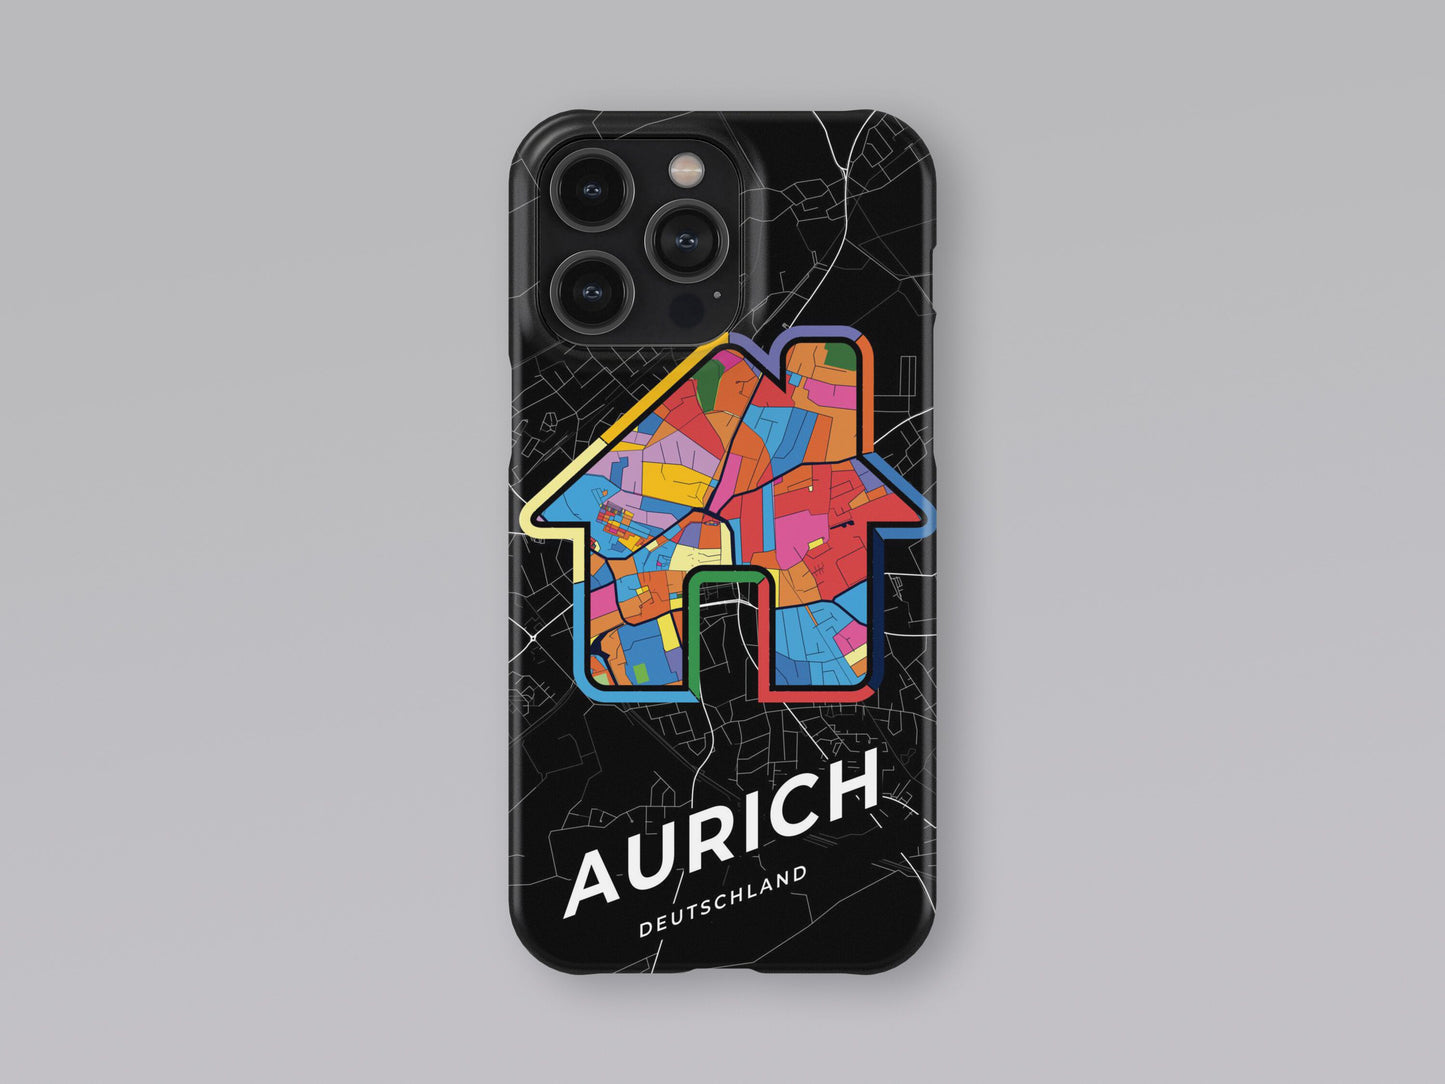 Aurich Deutschland slim phone case with colorful icon. Birthday, wedding or housewarming gift. Couple match cases. 3